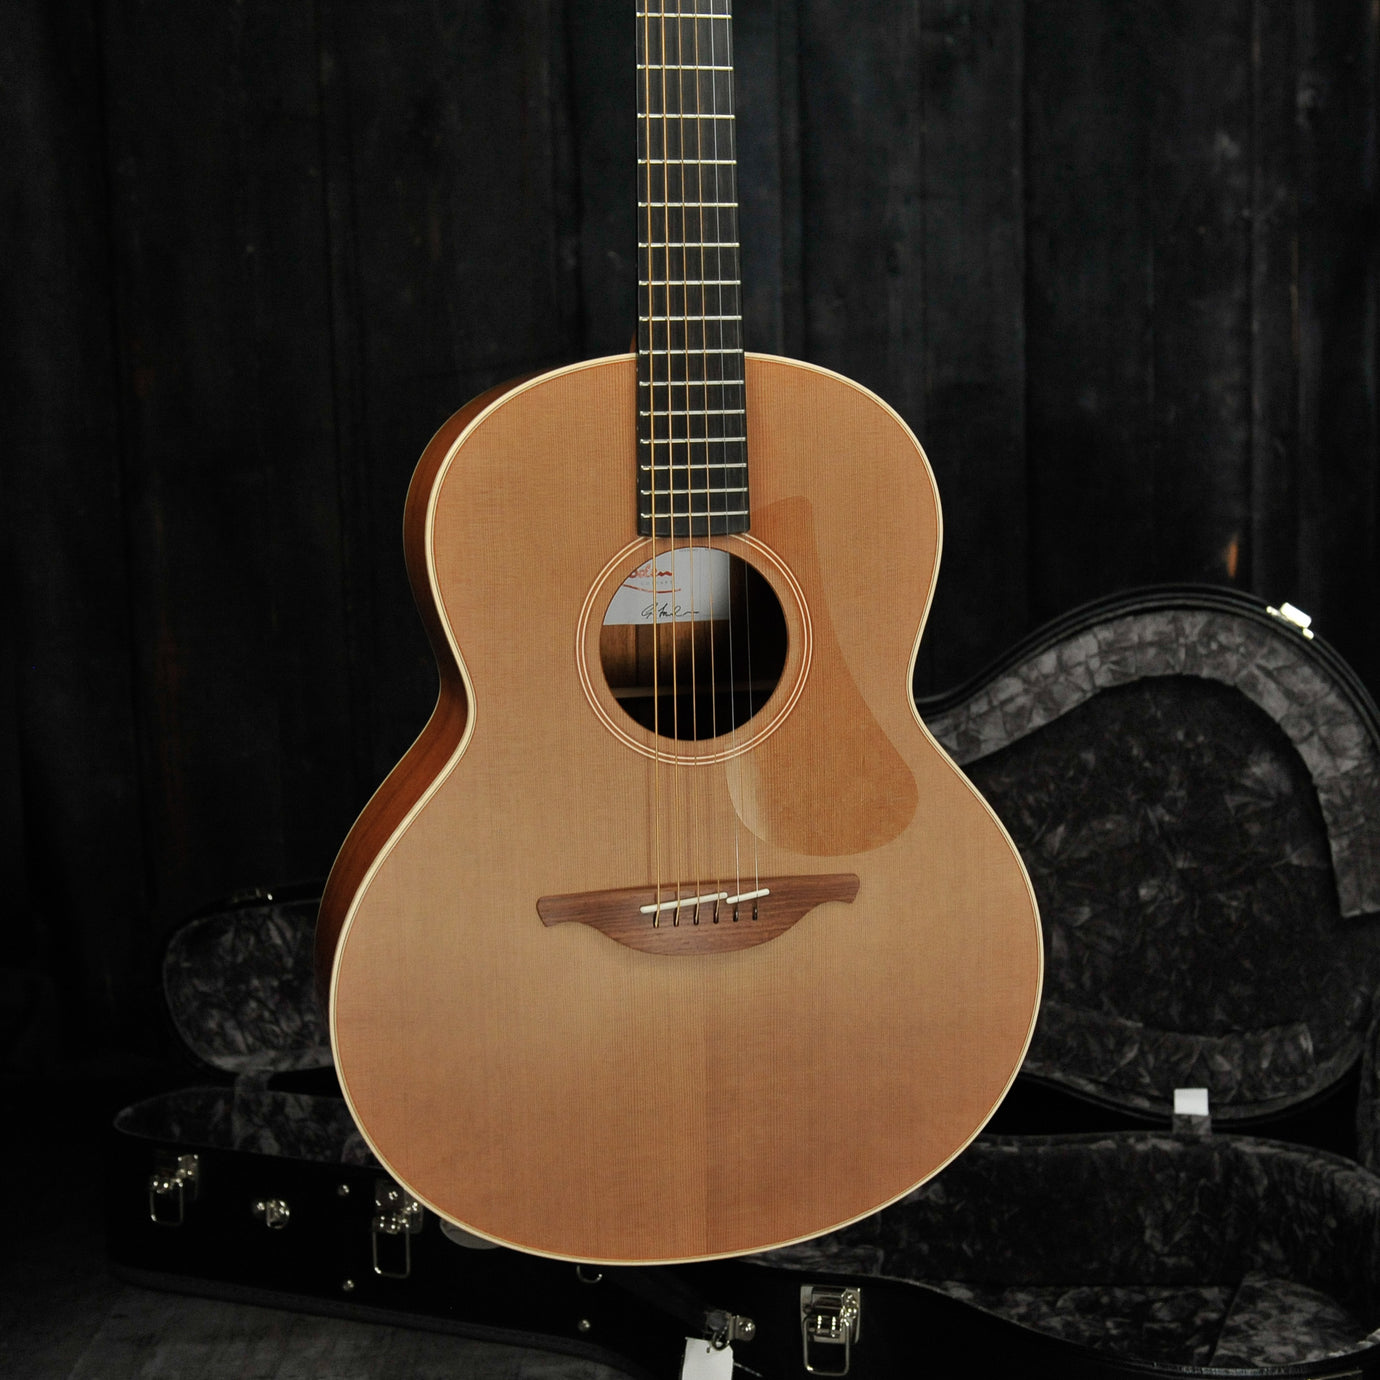 Image of a Lowden acoustic guitar